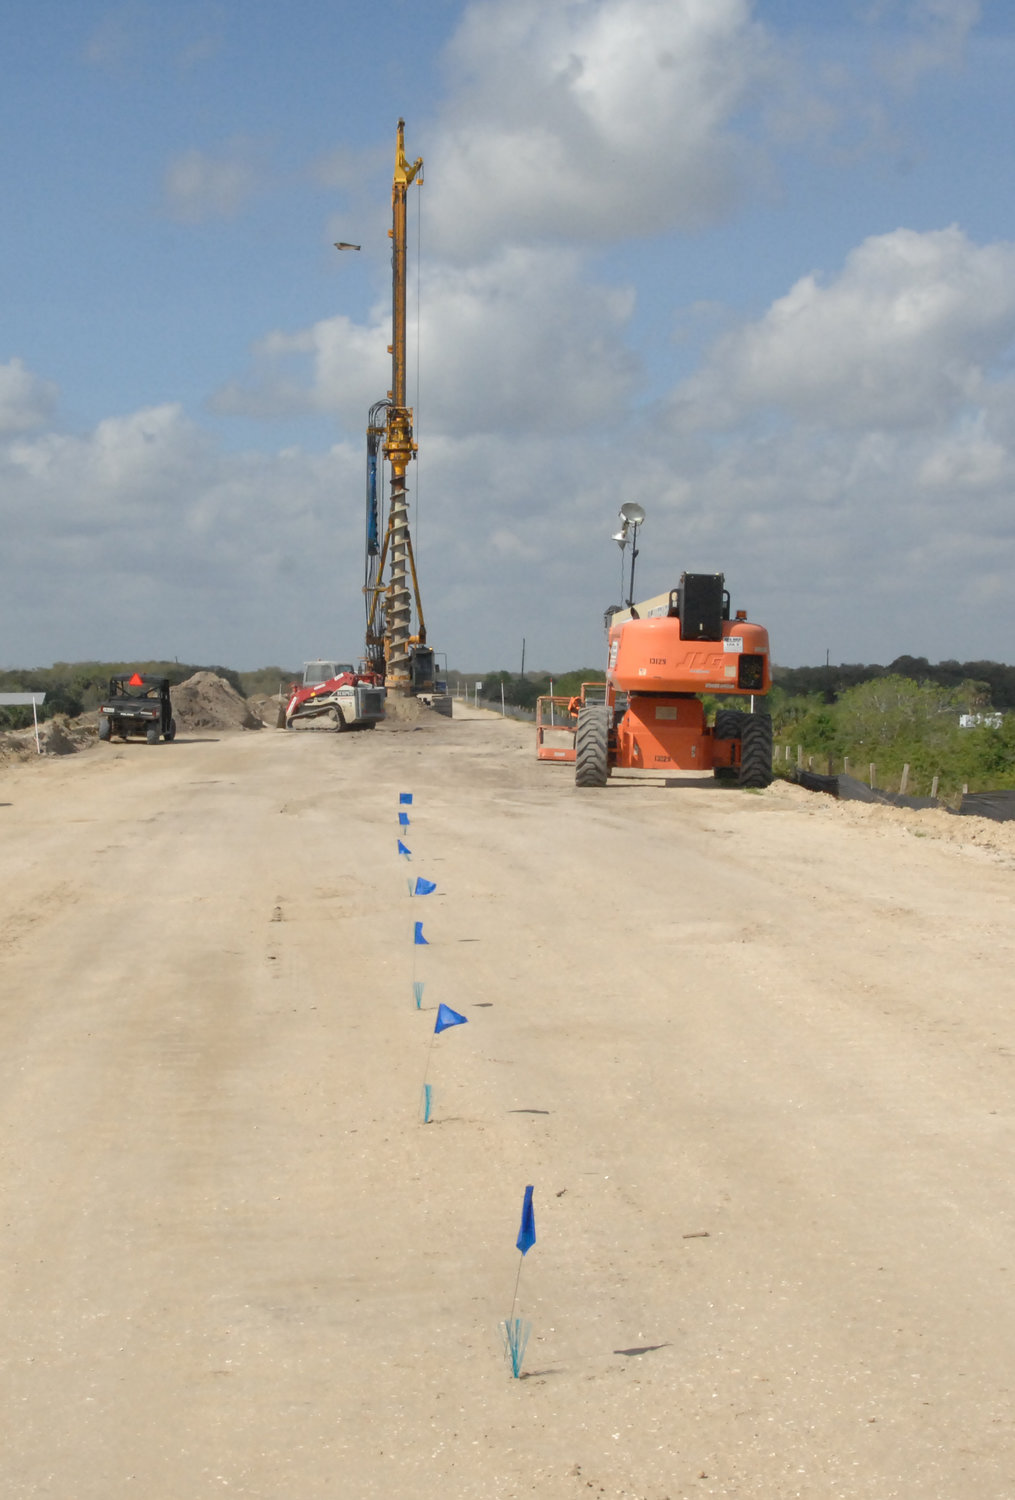 The blue flags mark the path for the pre-drilling machine which prepares the site for the Concrete Slurry Machine.